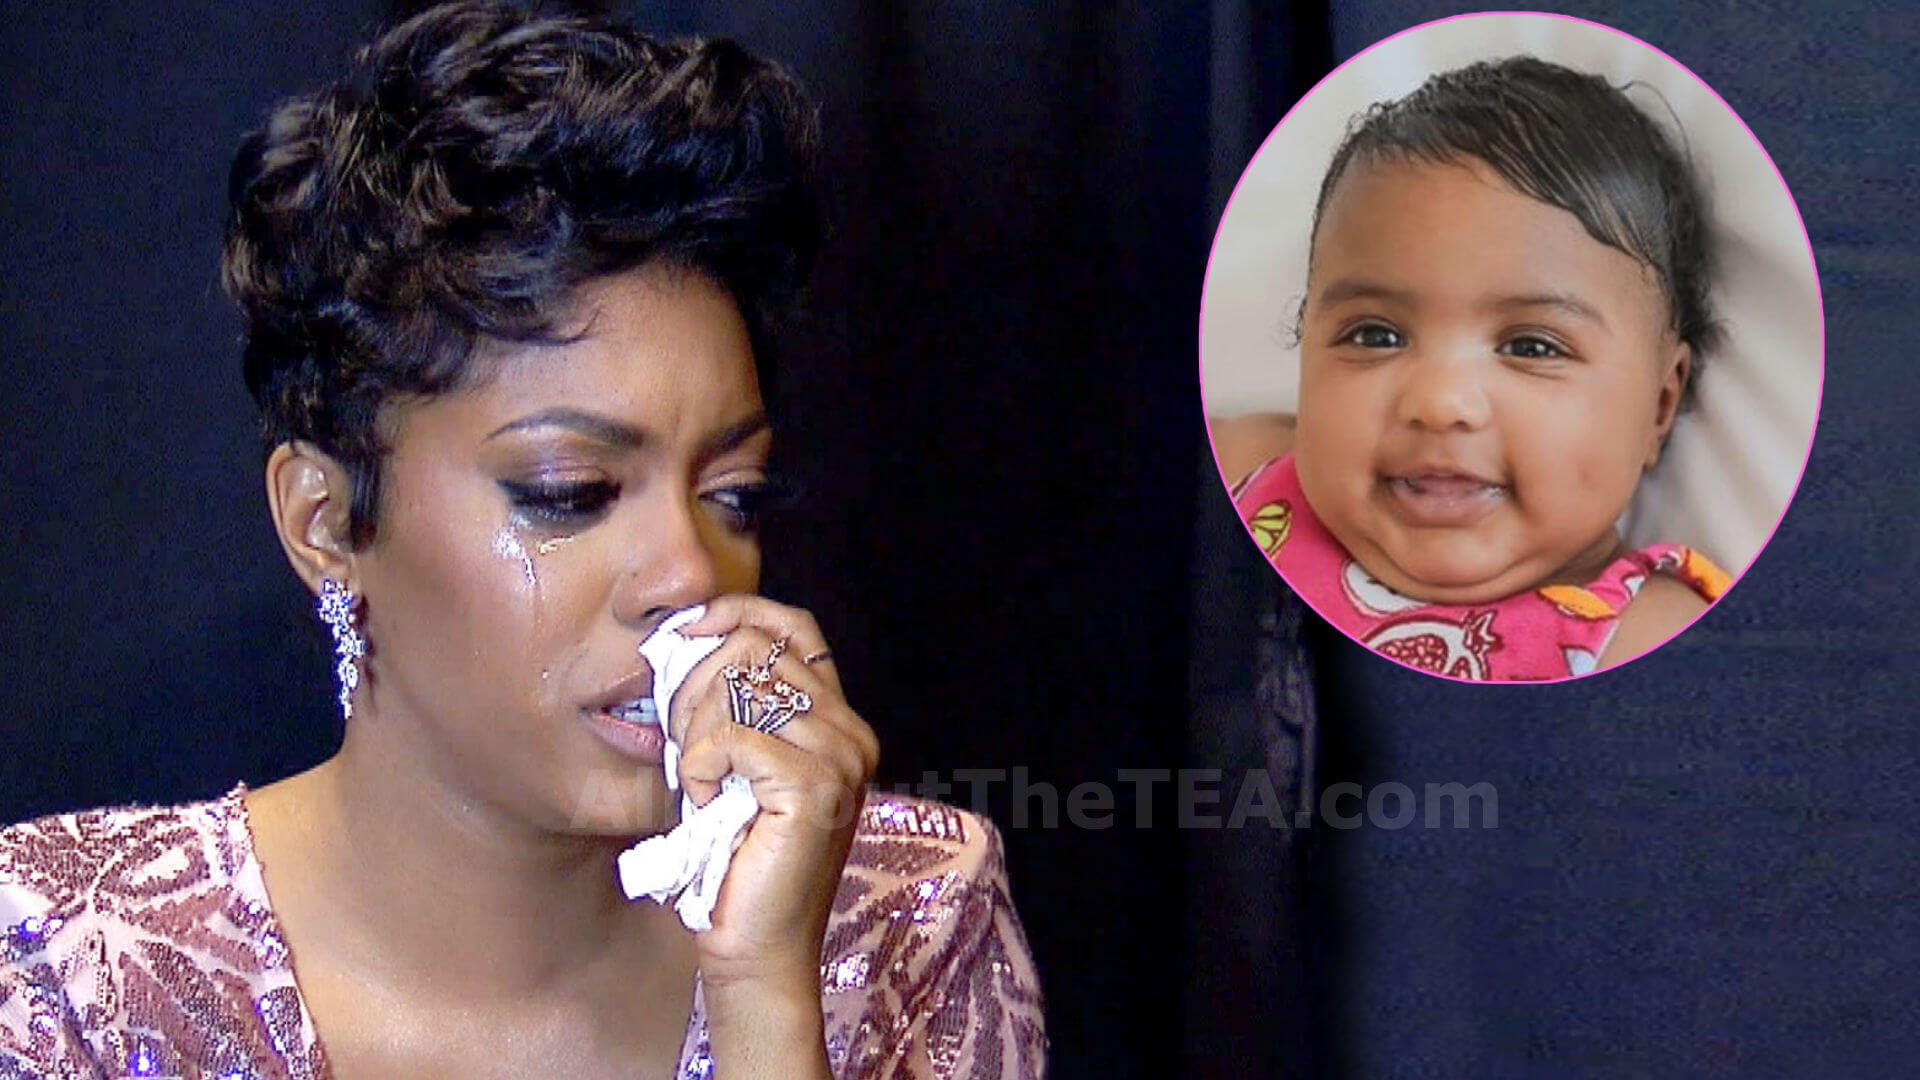 Internet Thugs Attack Porsha Williams’ ‘Ugly’ Baby On Social Media: ‘That Baby Is Not Cute’